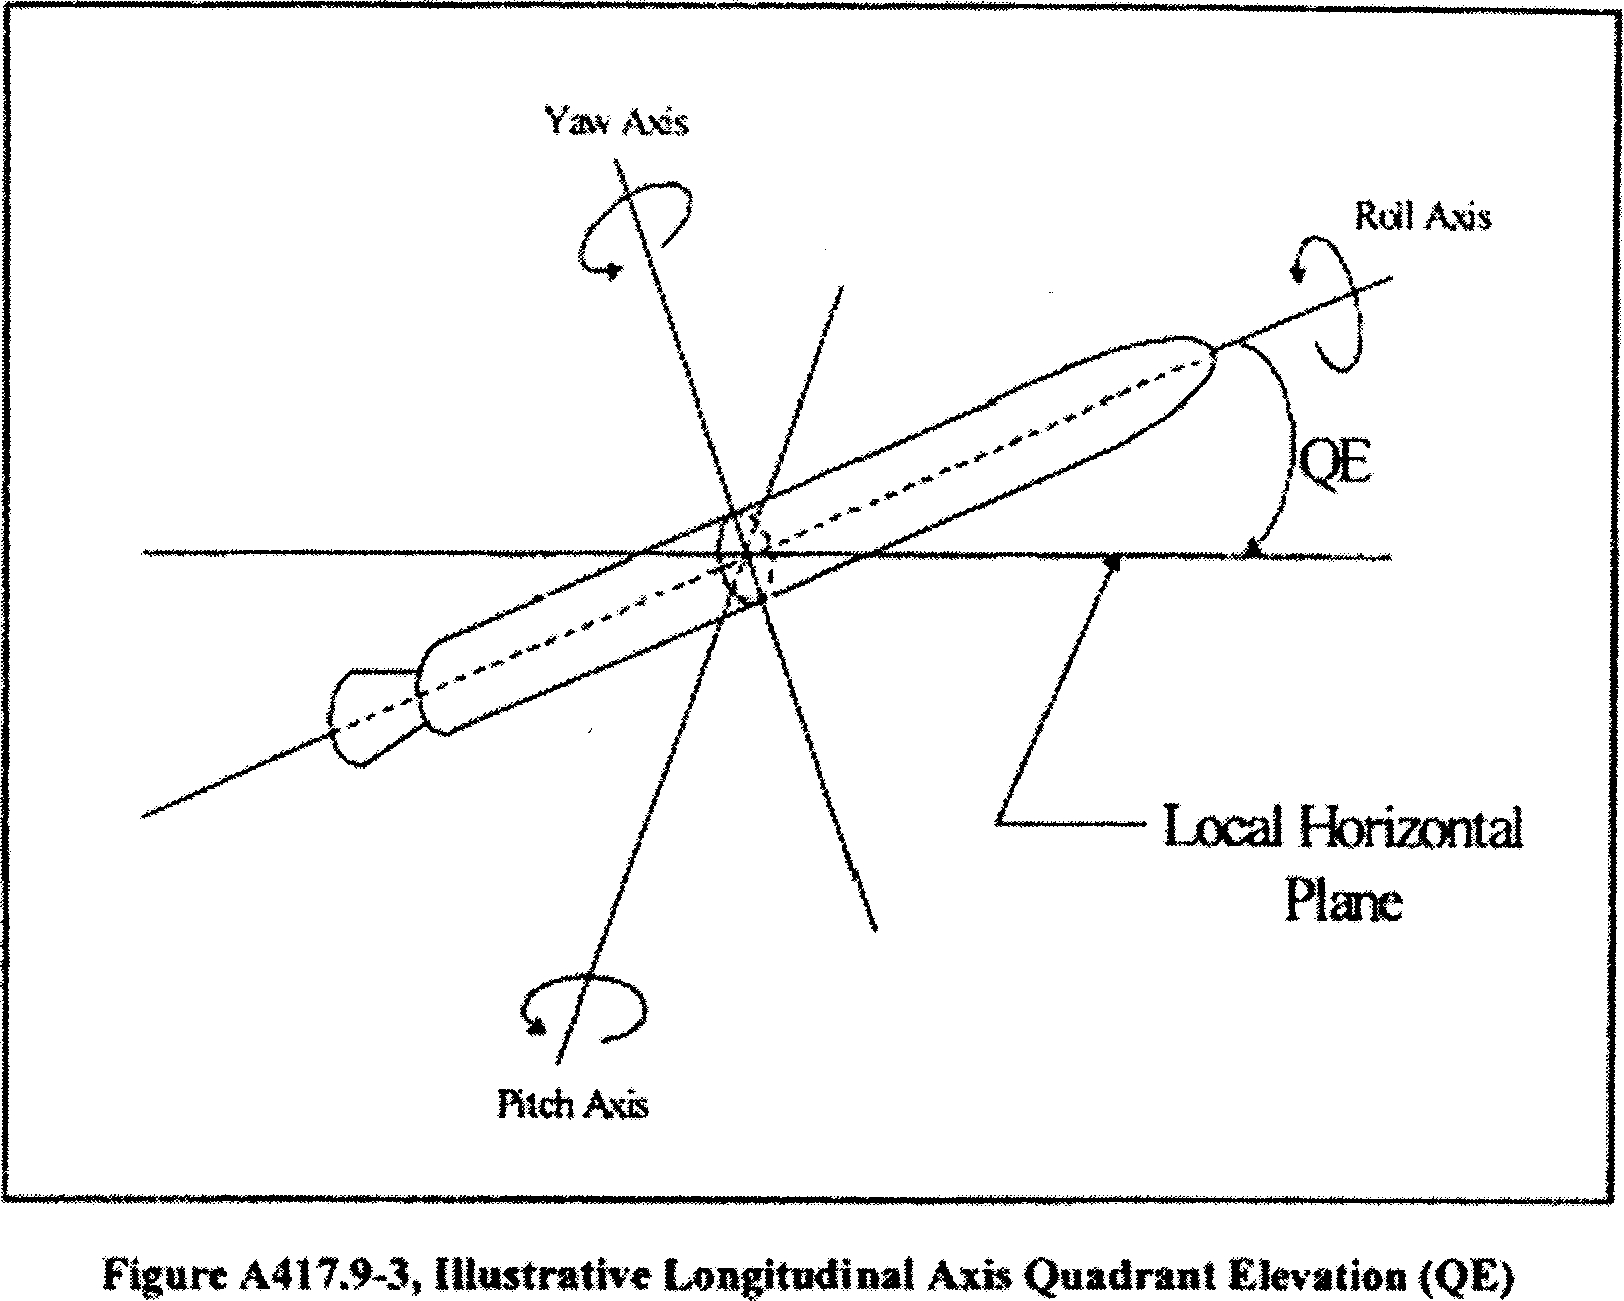 Graphic of (iii) Vehicle orientation. The launch operator must file tabular or graphical data for the vehicle orientation in the form of roll, pitch, and yaw angular orientation of the vehicle longitudinal axis as a function of time into the turn for each turn initiation time. Angular orientation of a launch vehicle's longitudinal axis is illustrated in figures A417.9-3 and A417.9-4.